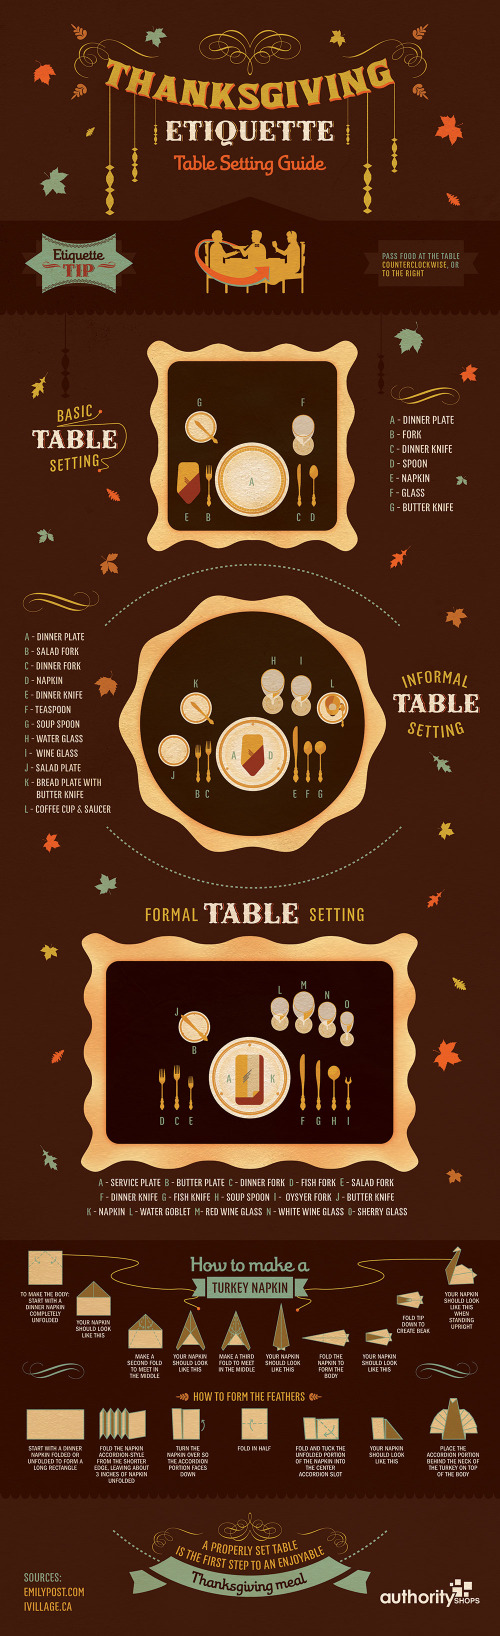 Thanksgiving Etiquette Table Setting Guide infographic